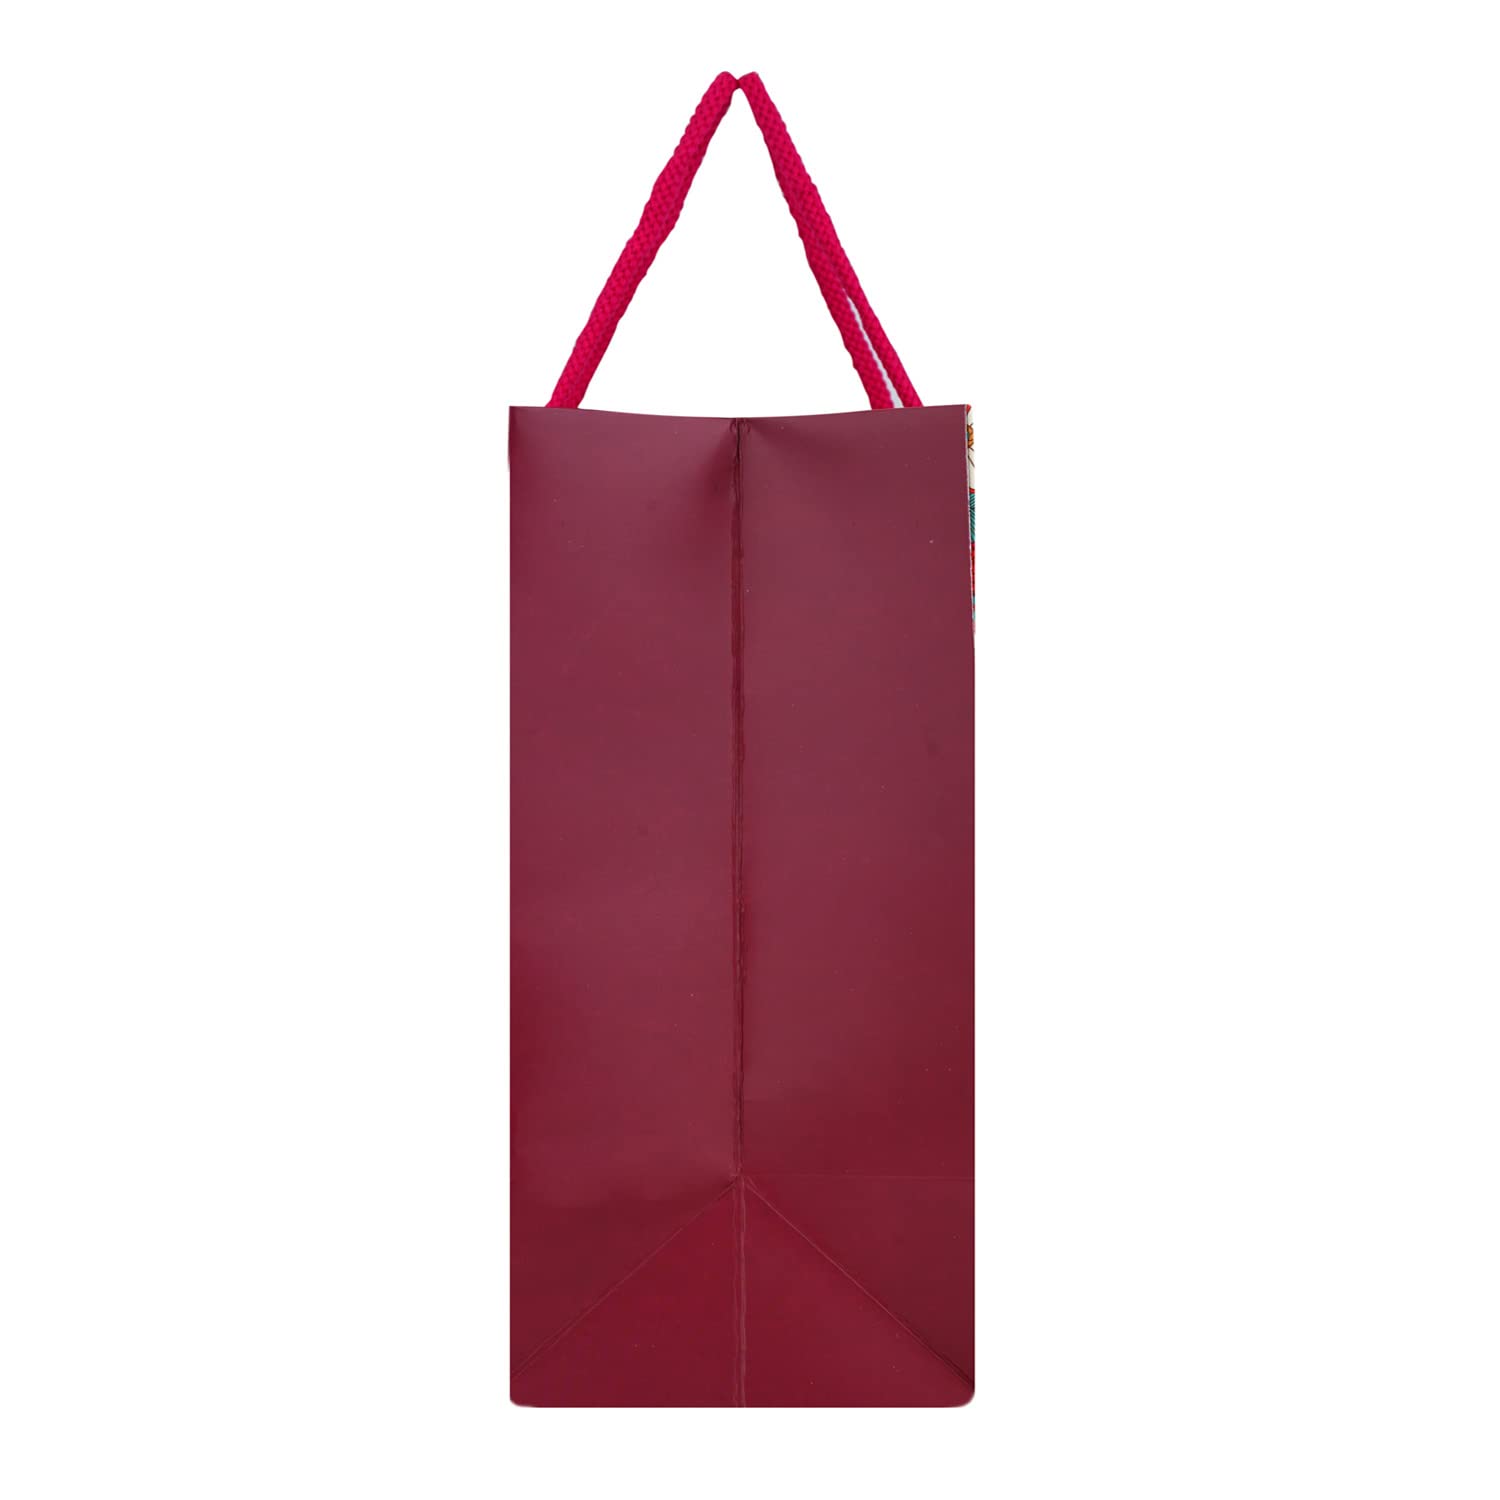 Buy Apkamart Paper Bags for Return Gifts online at best price